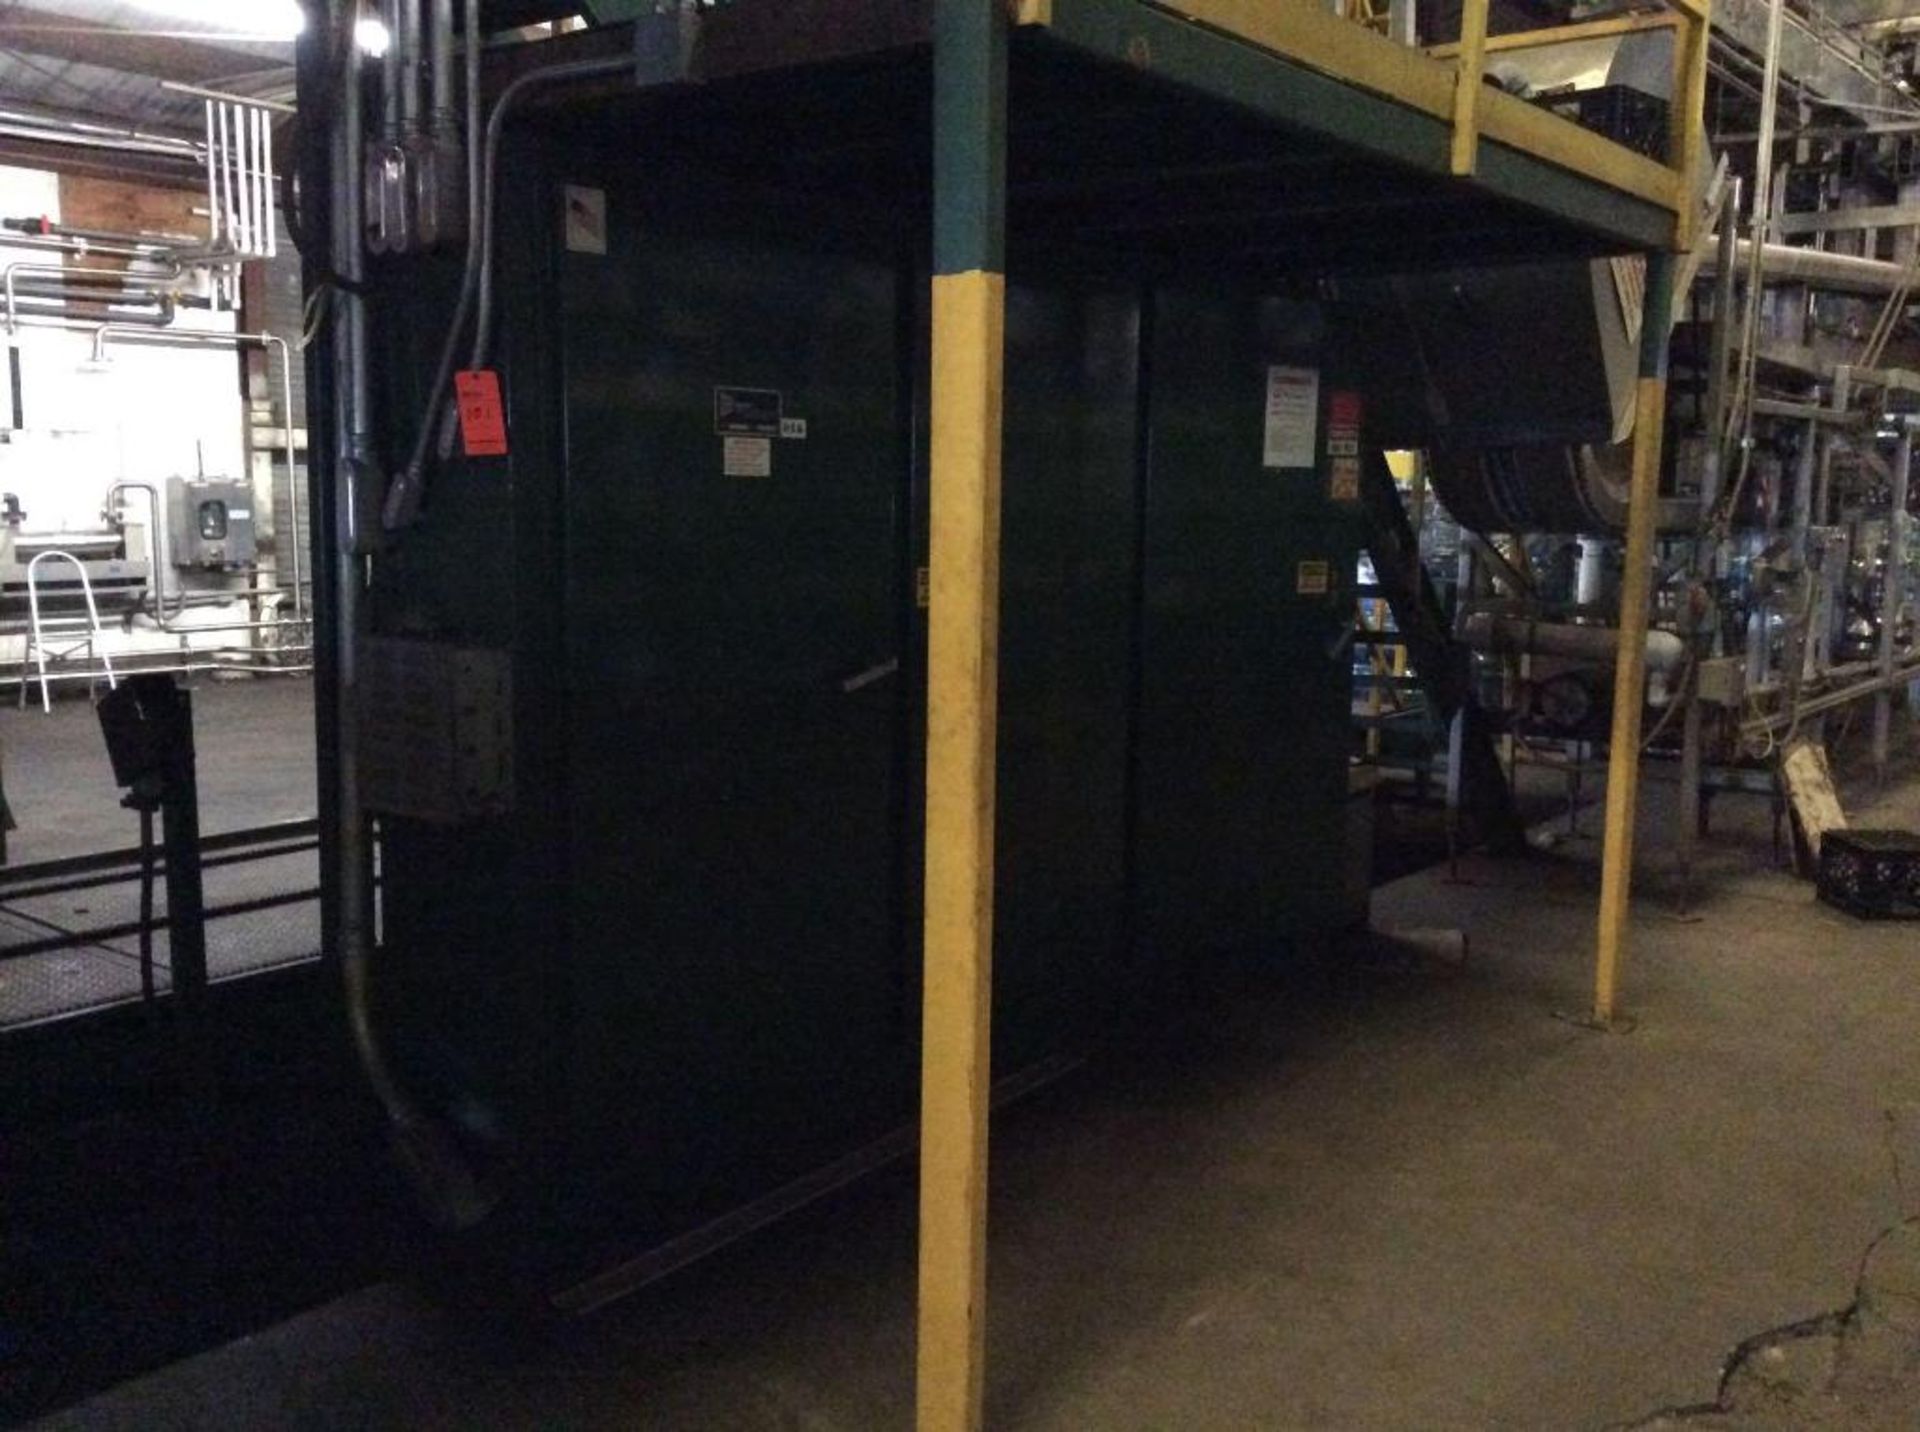 Simplimatic high level bulk depalletizer, mn 400-D, sn 1840-10730 includes automatic pick and place - Image 4 of 8